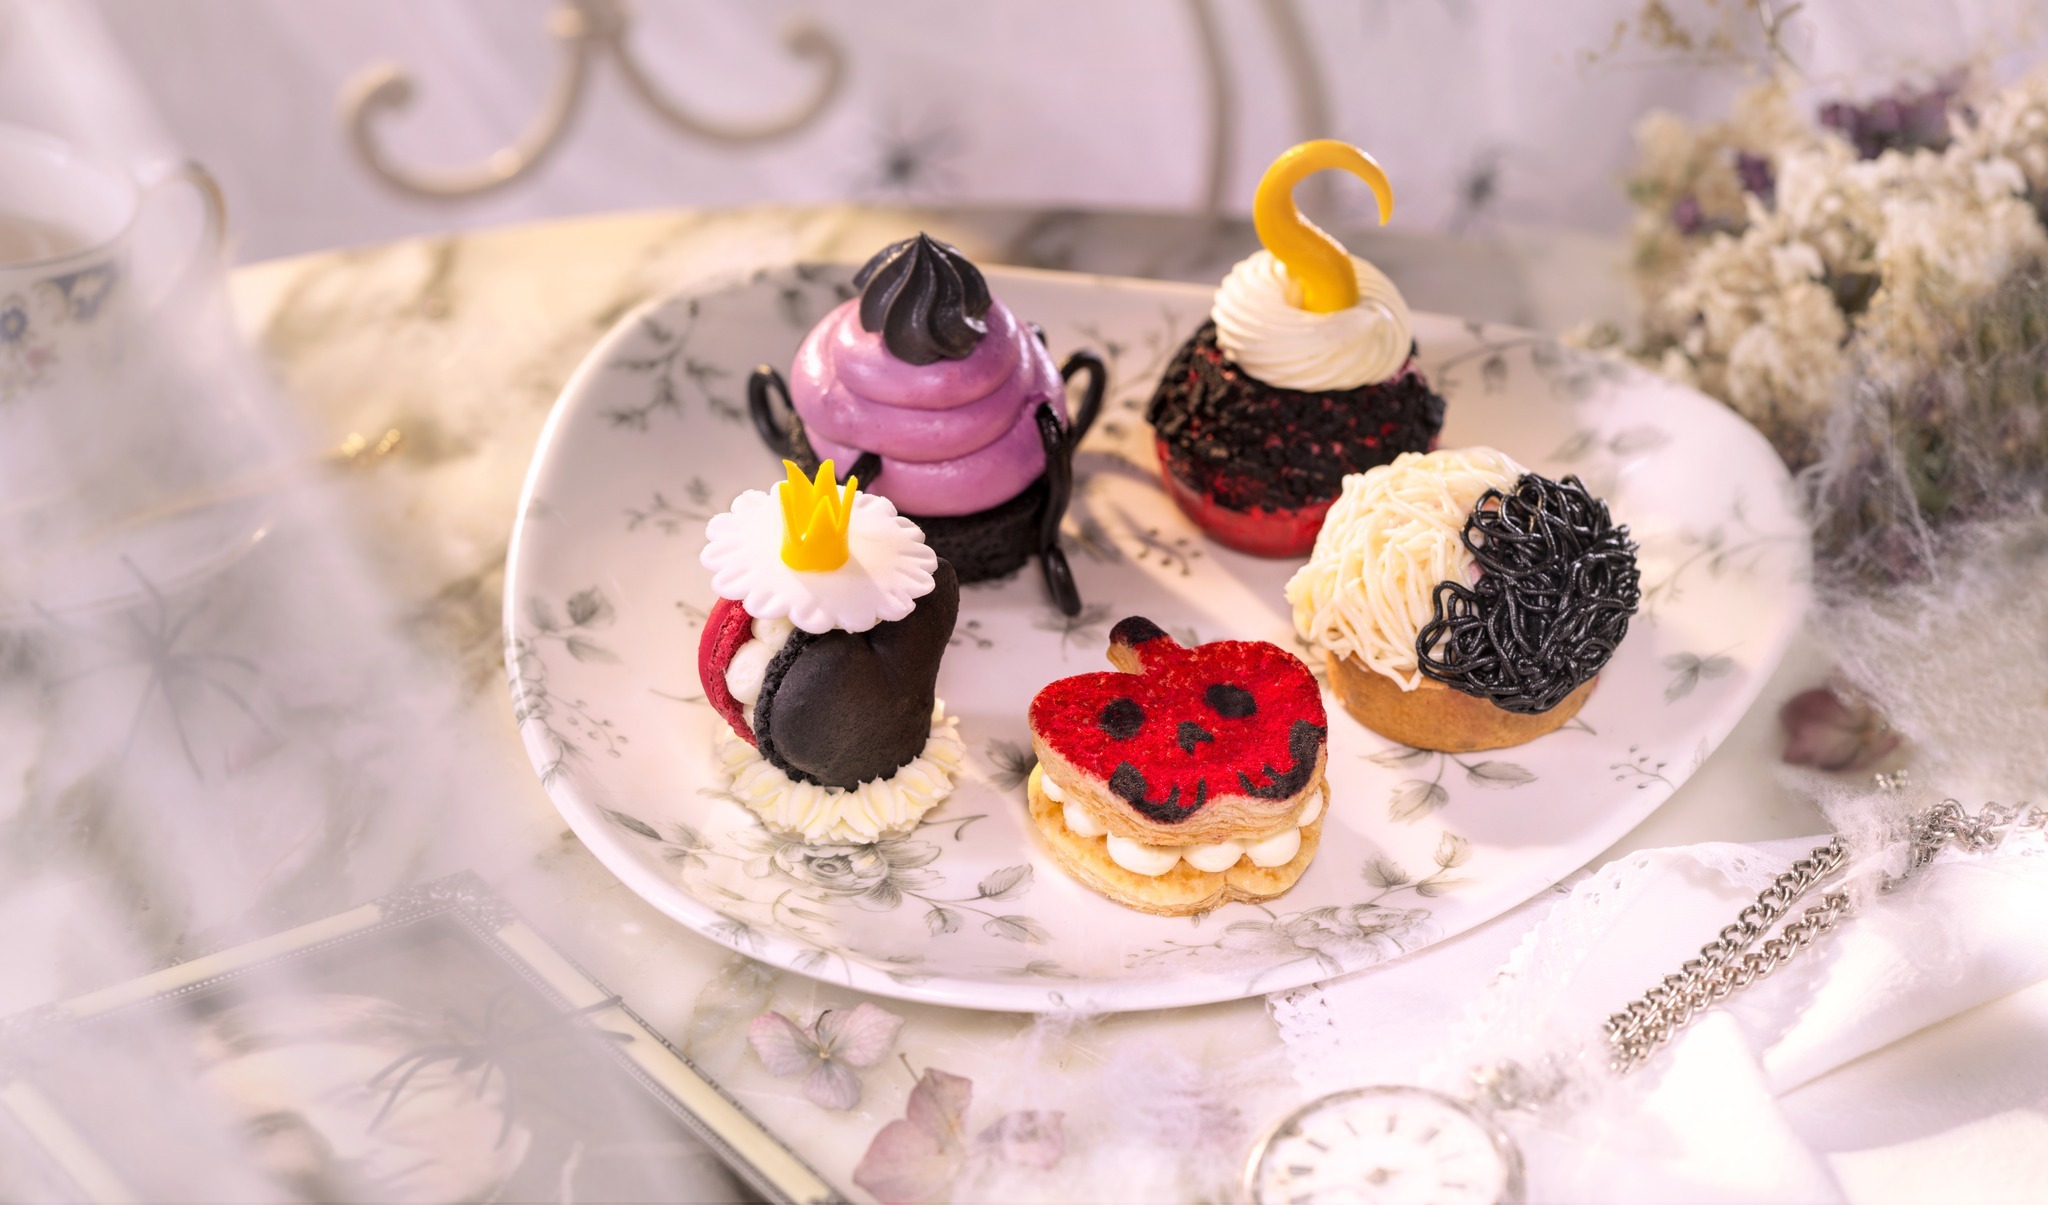 Les gourmandises pour Halloween  - Page 4 Mgso